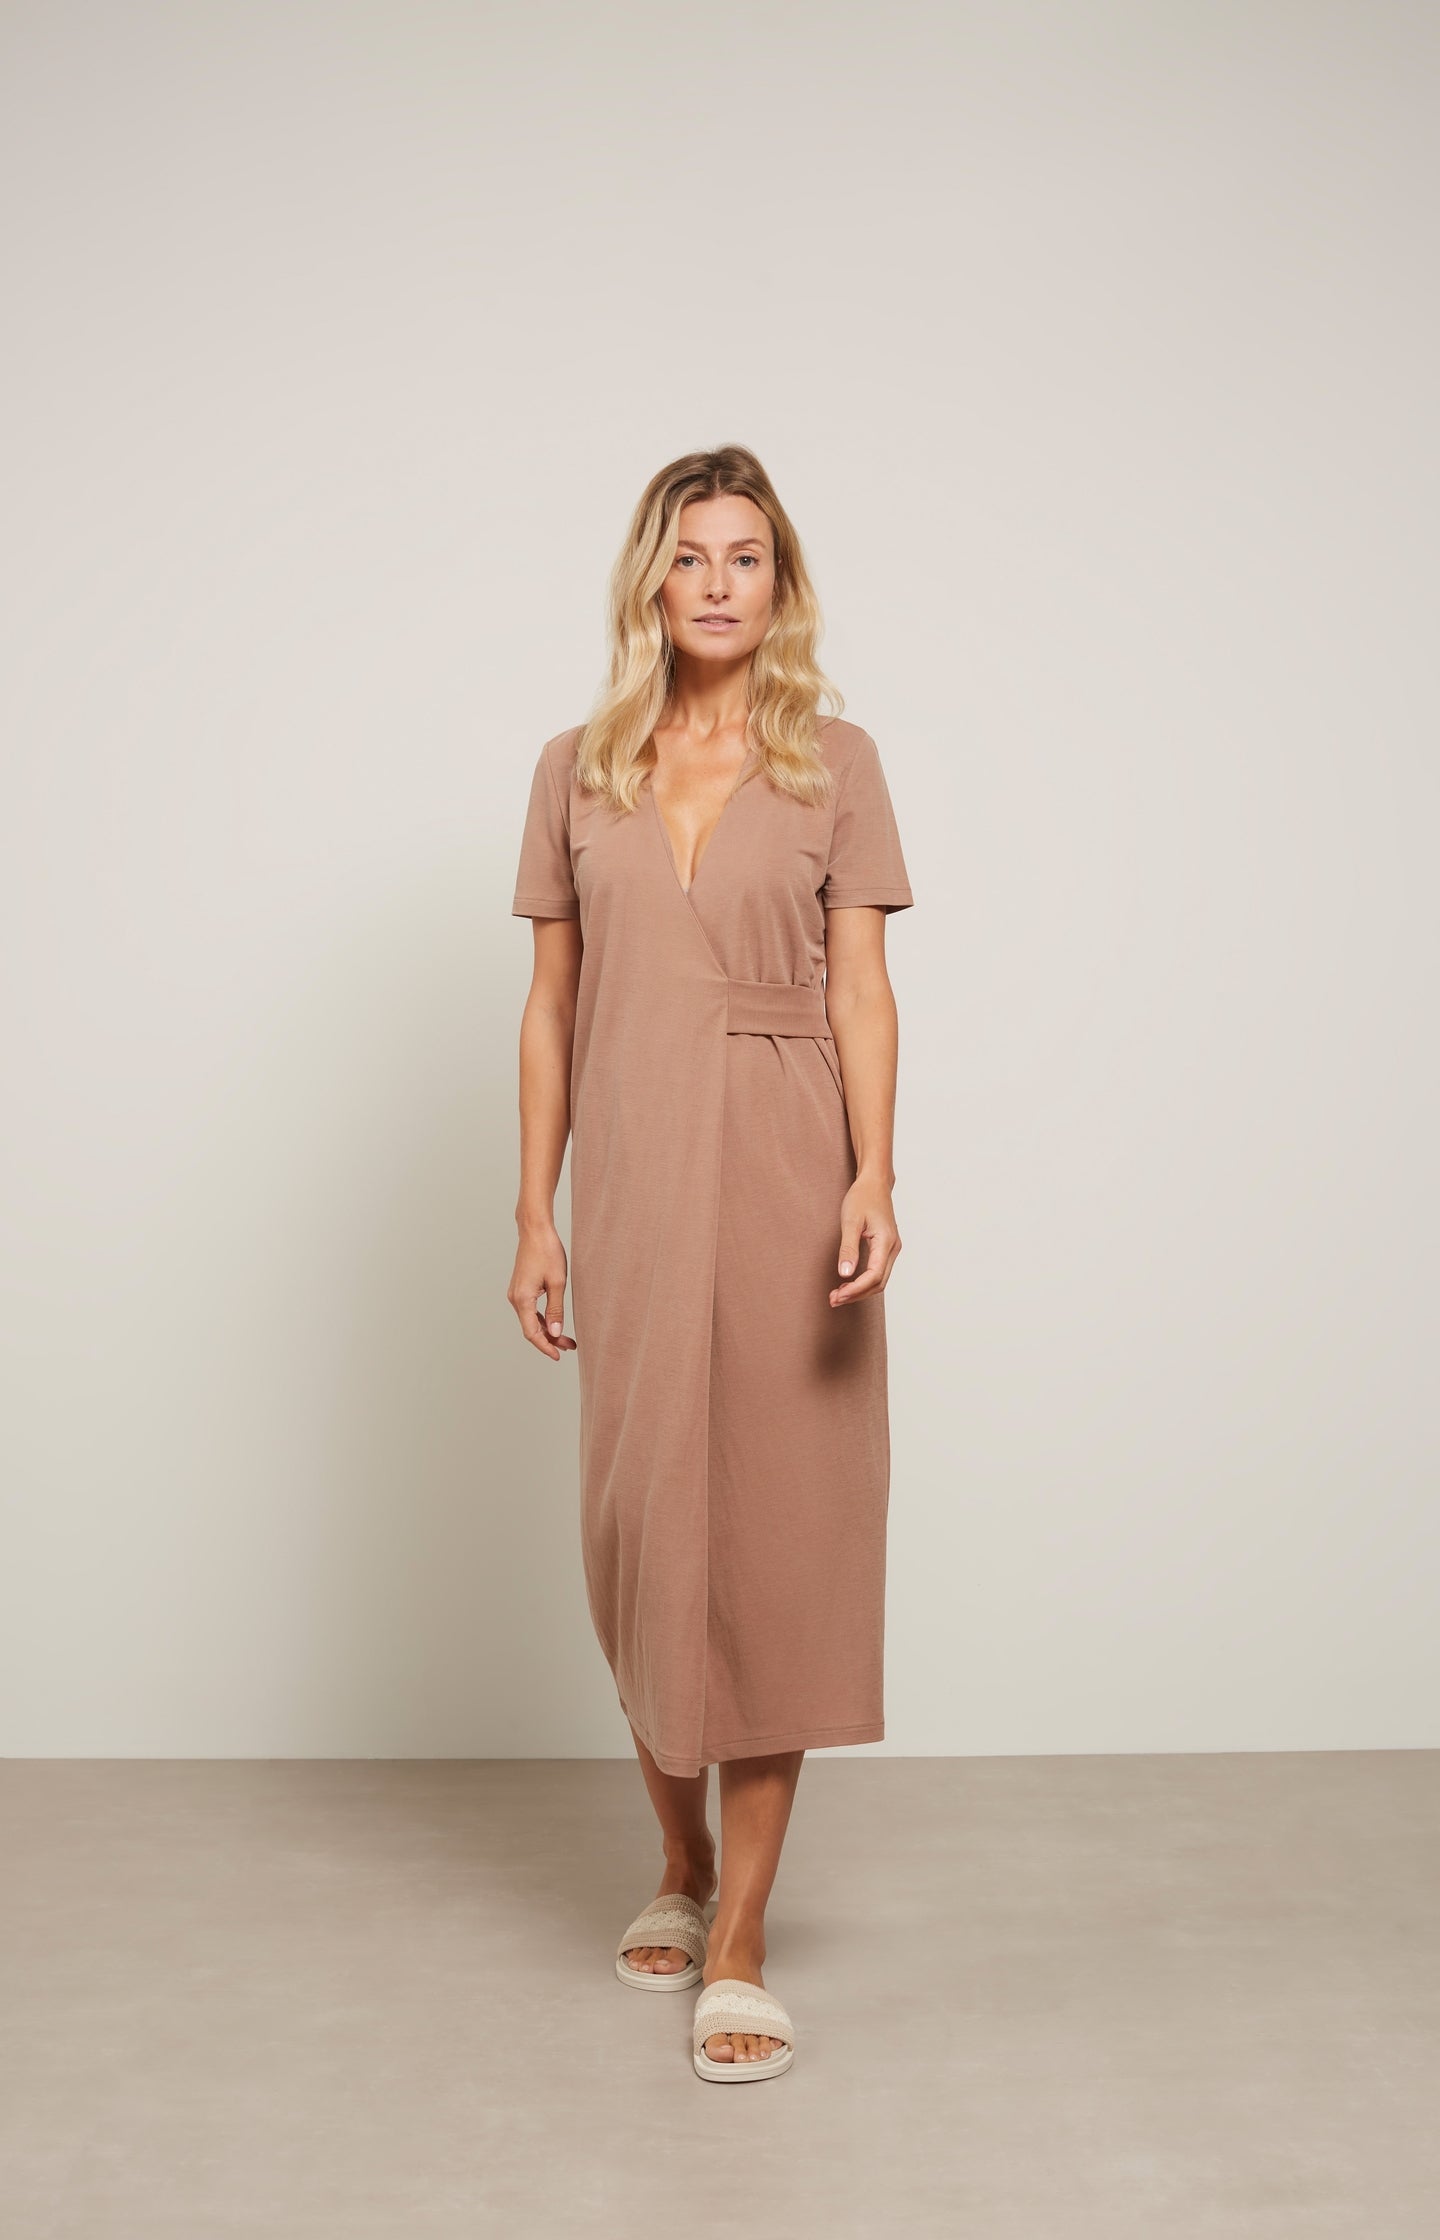 Faux wrap dress with V-neck, short sleeves an waist detail - Type: lookbook